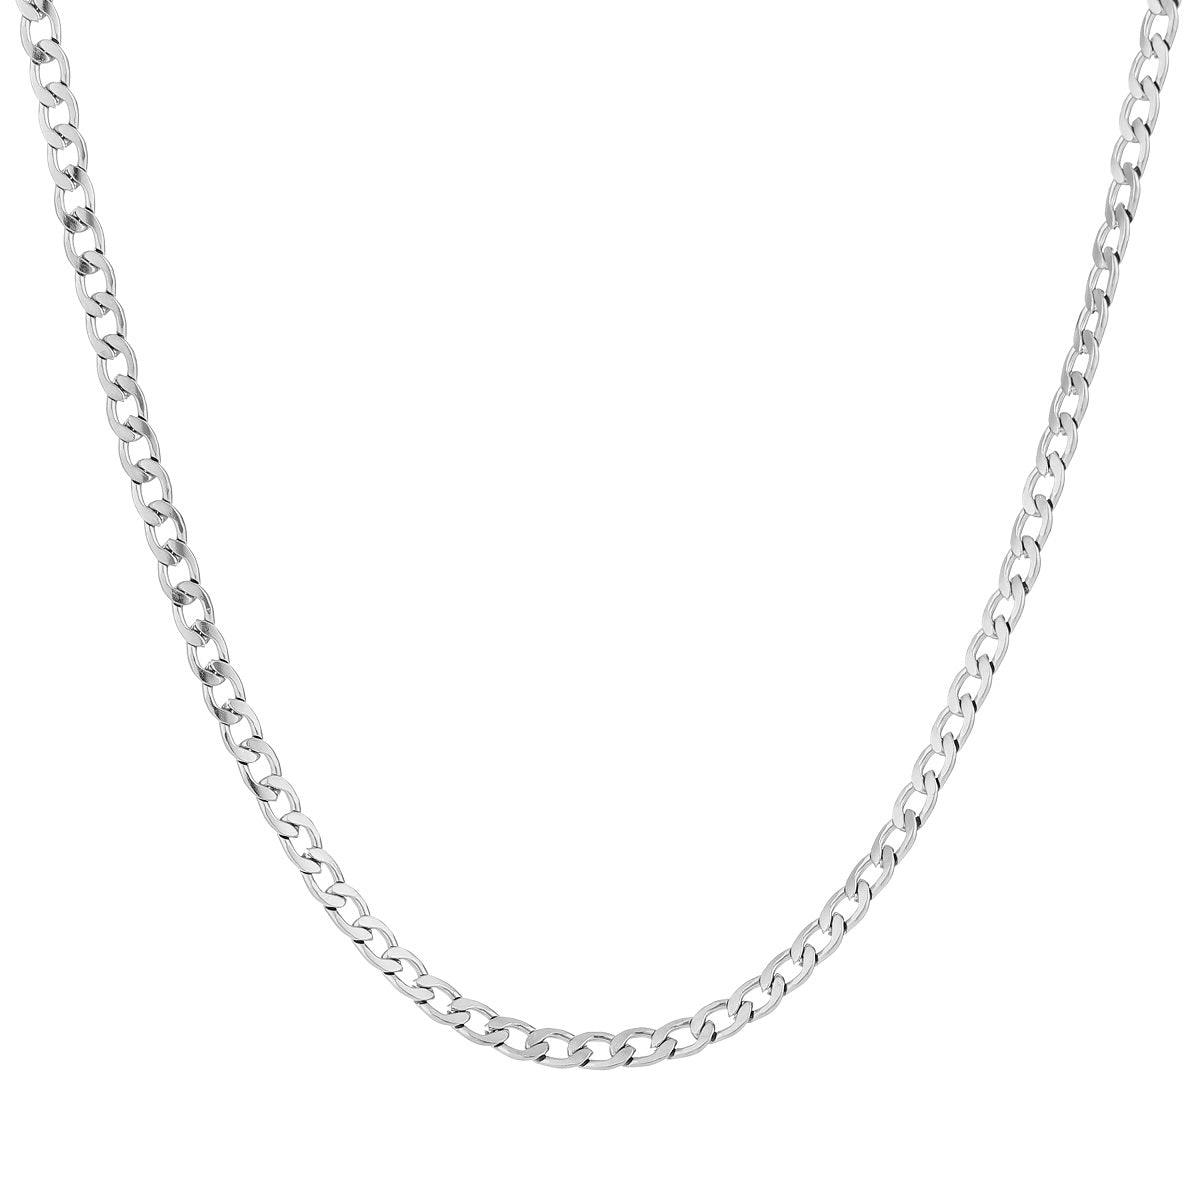 Ketting Tiny Chain Zilver